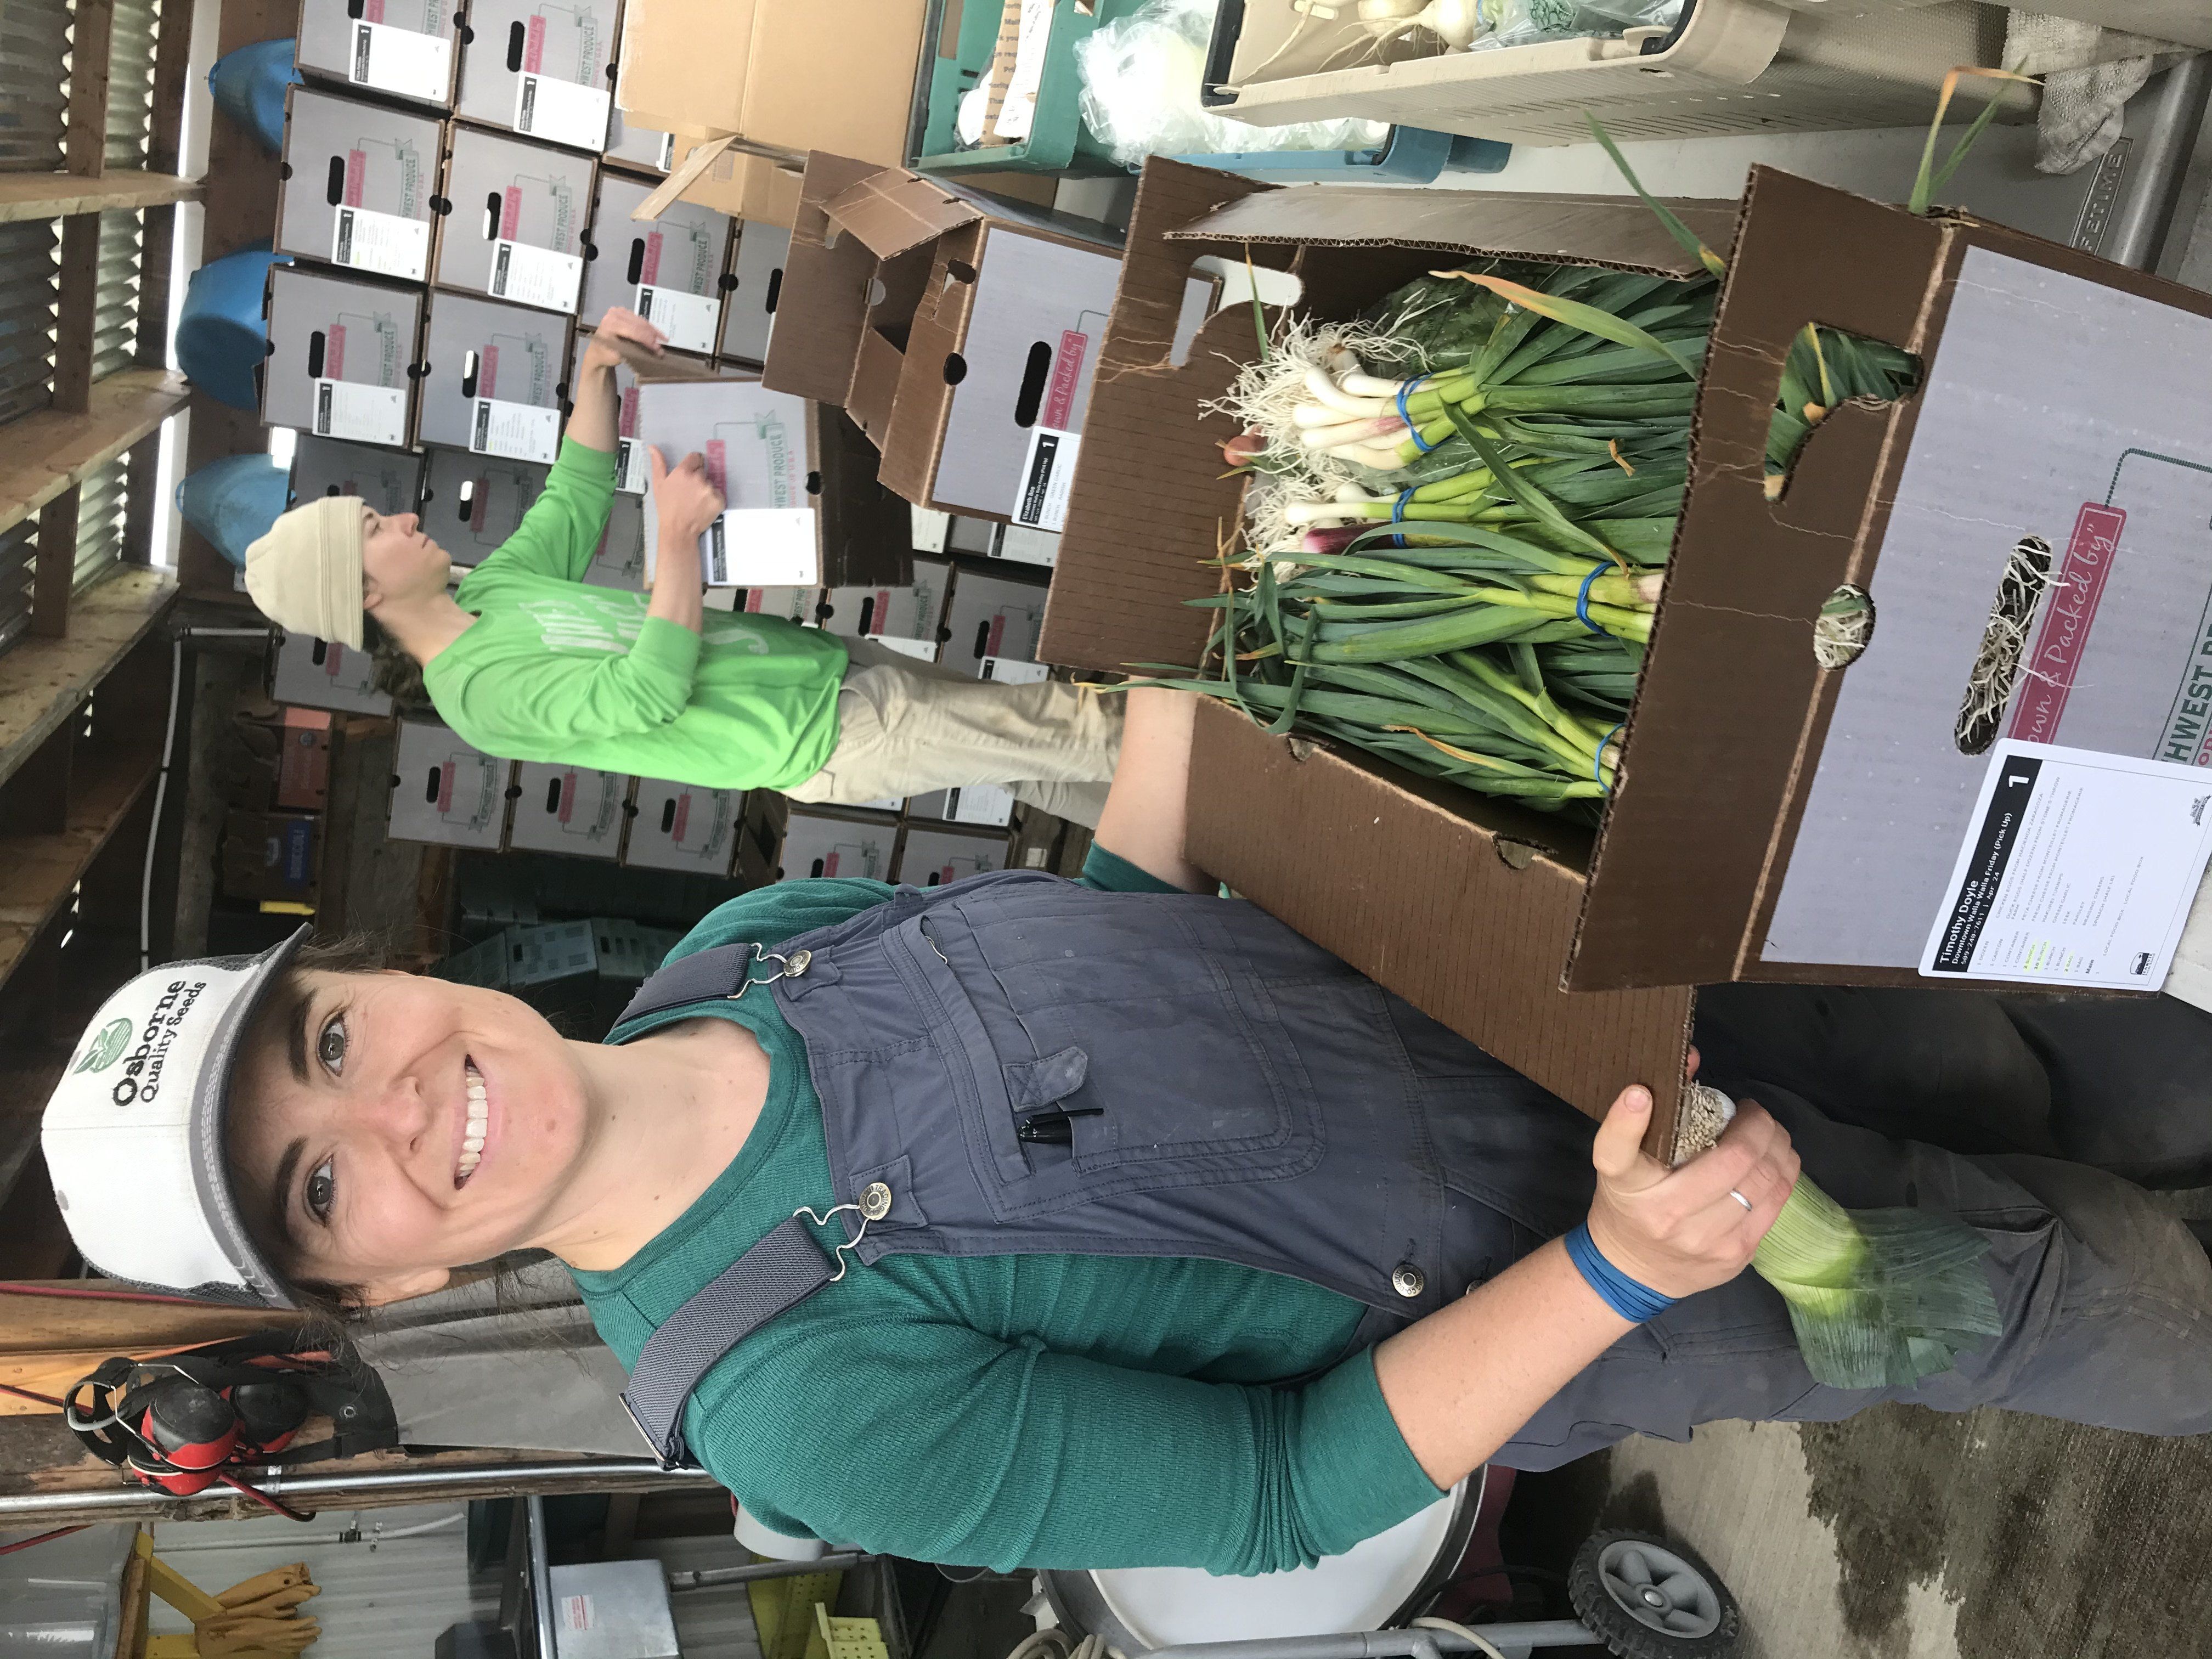 Previous Happening: Farm Happenings for May 1, 2020